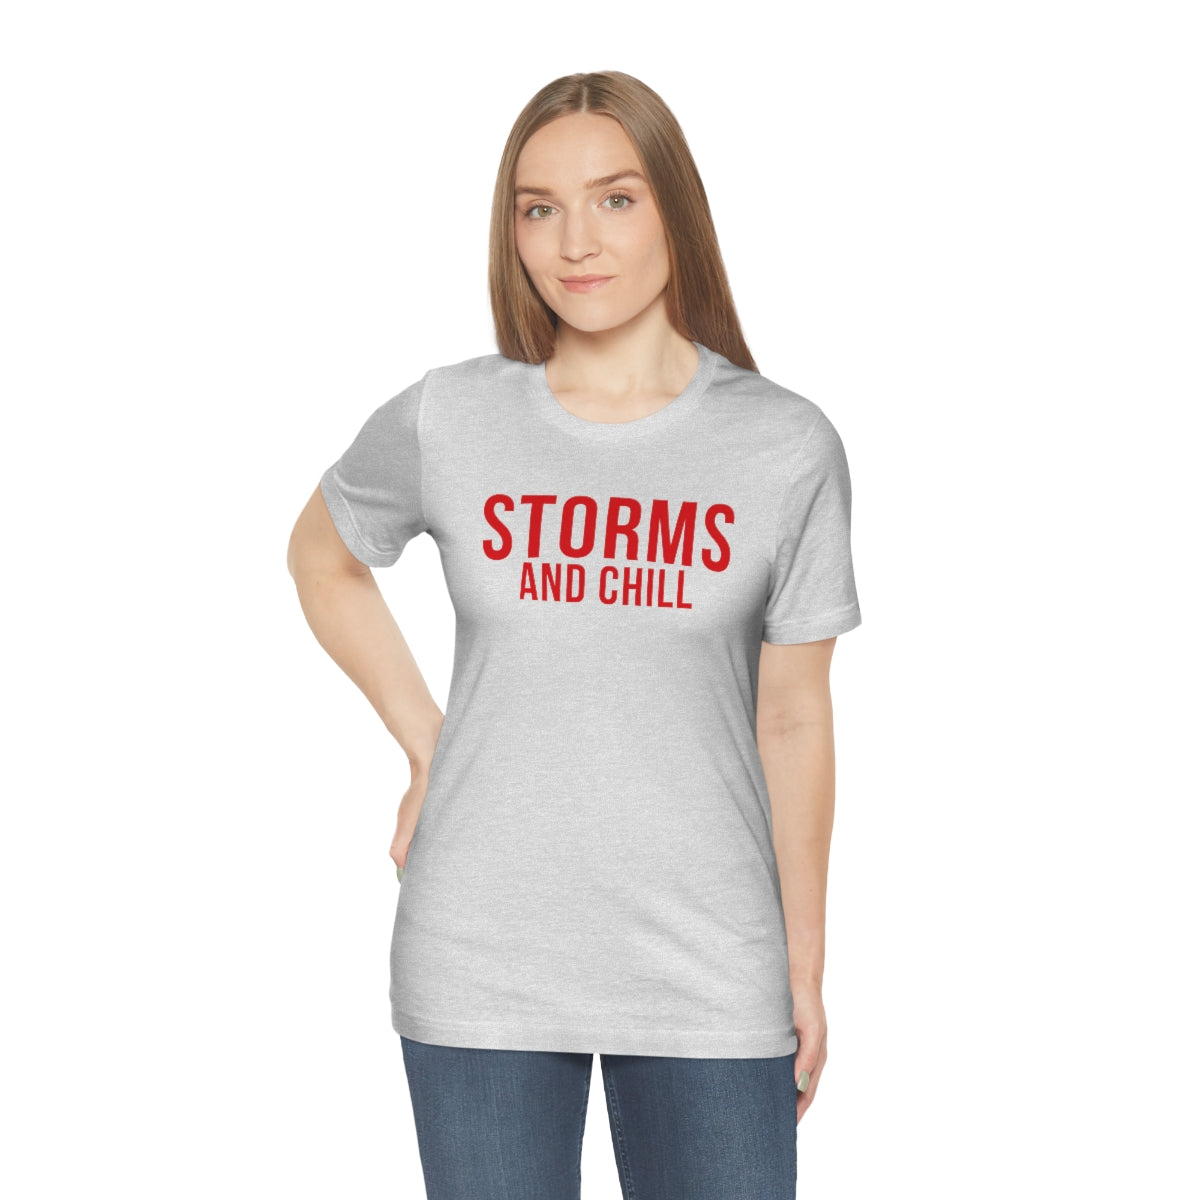 Storms and Chill Tee 